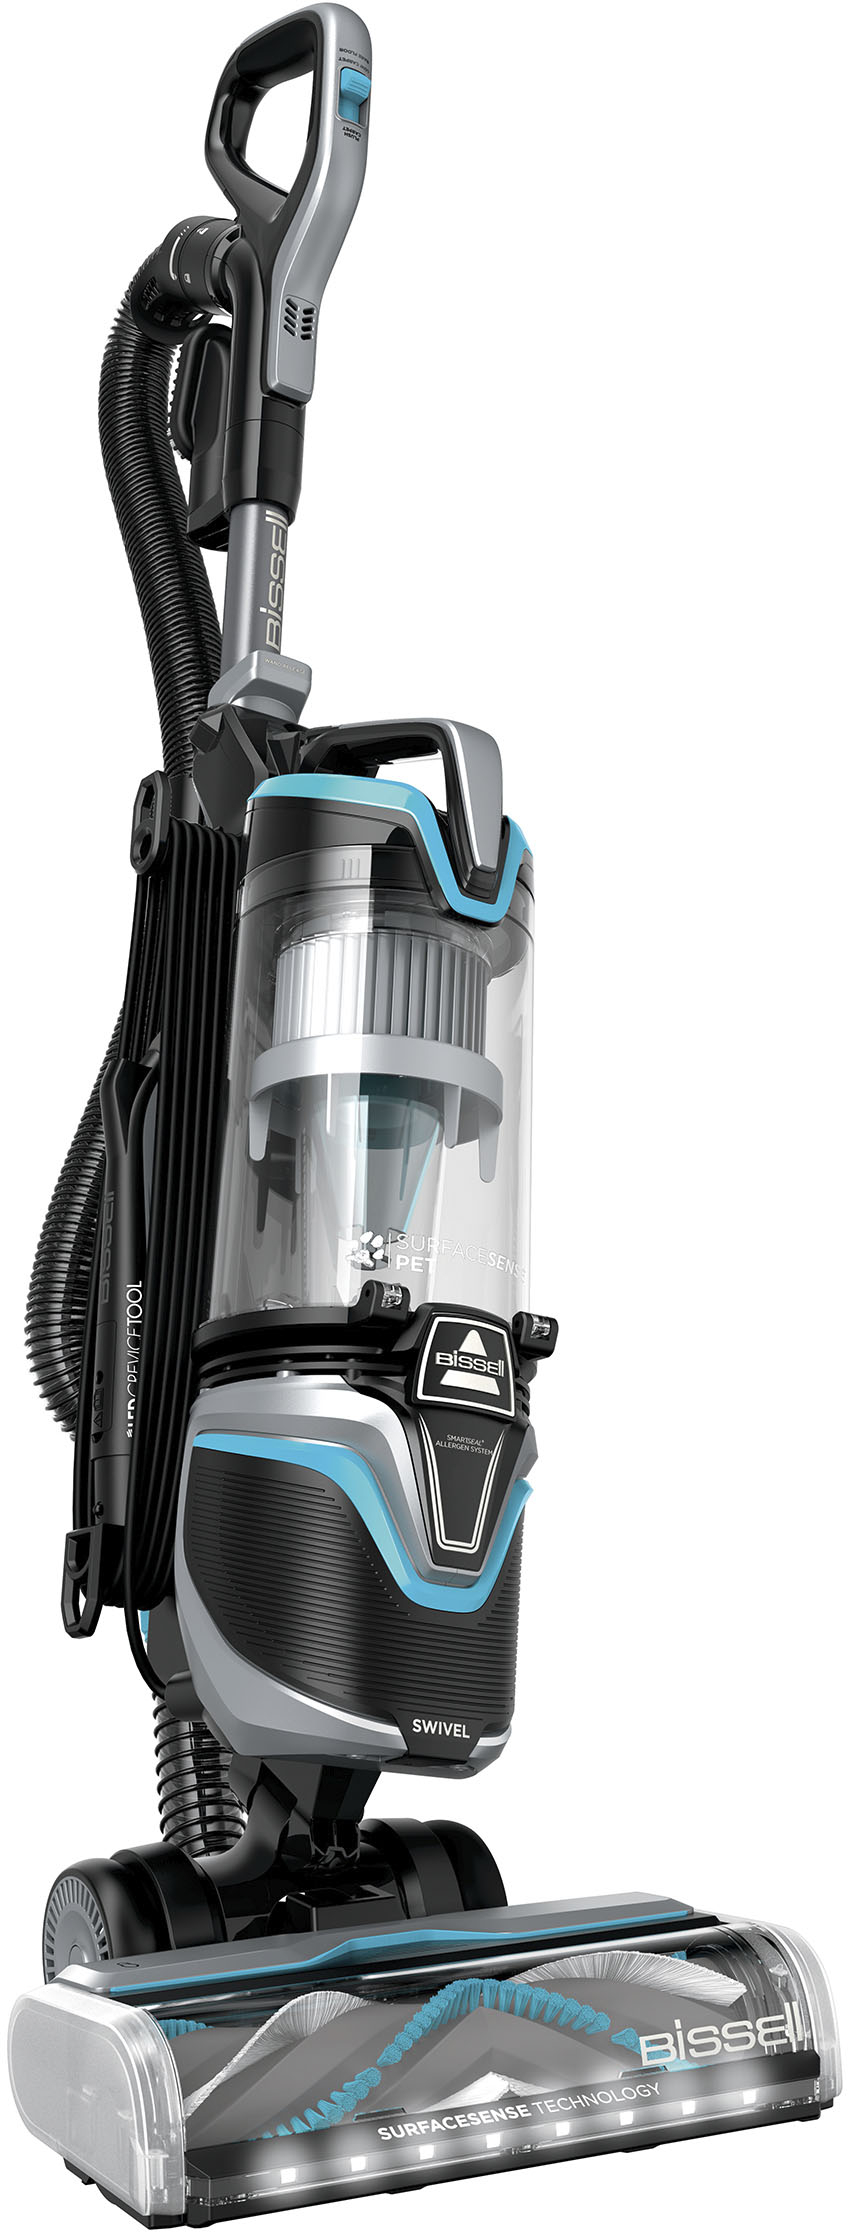 Bissell SurfaceSense Pet Multi-Surface Vacuum in Disco Teal and Silver